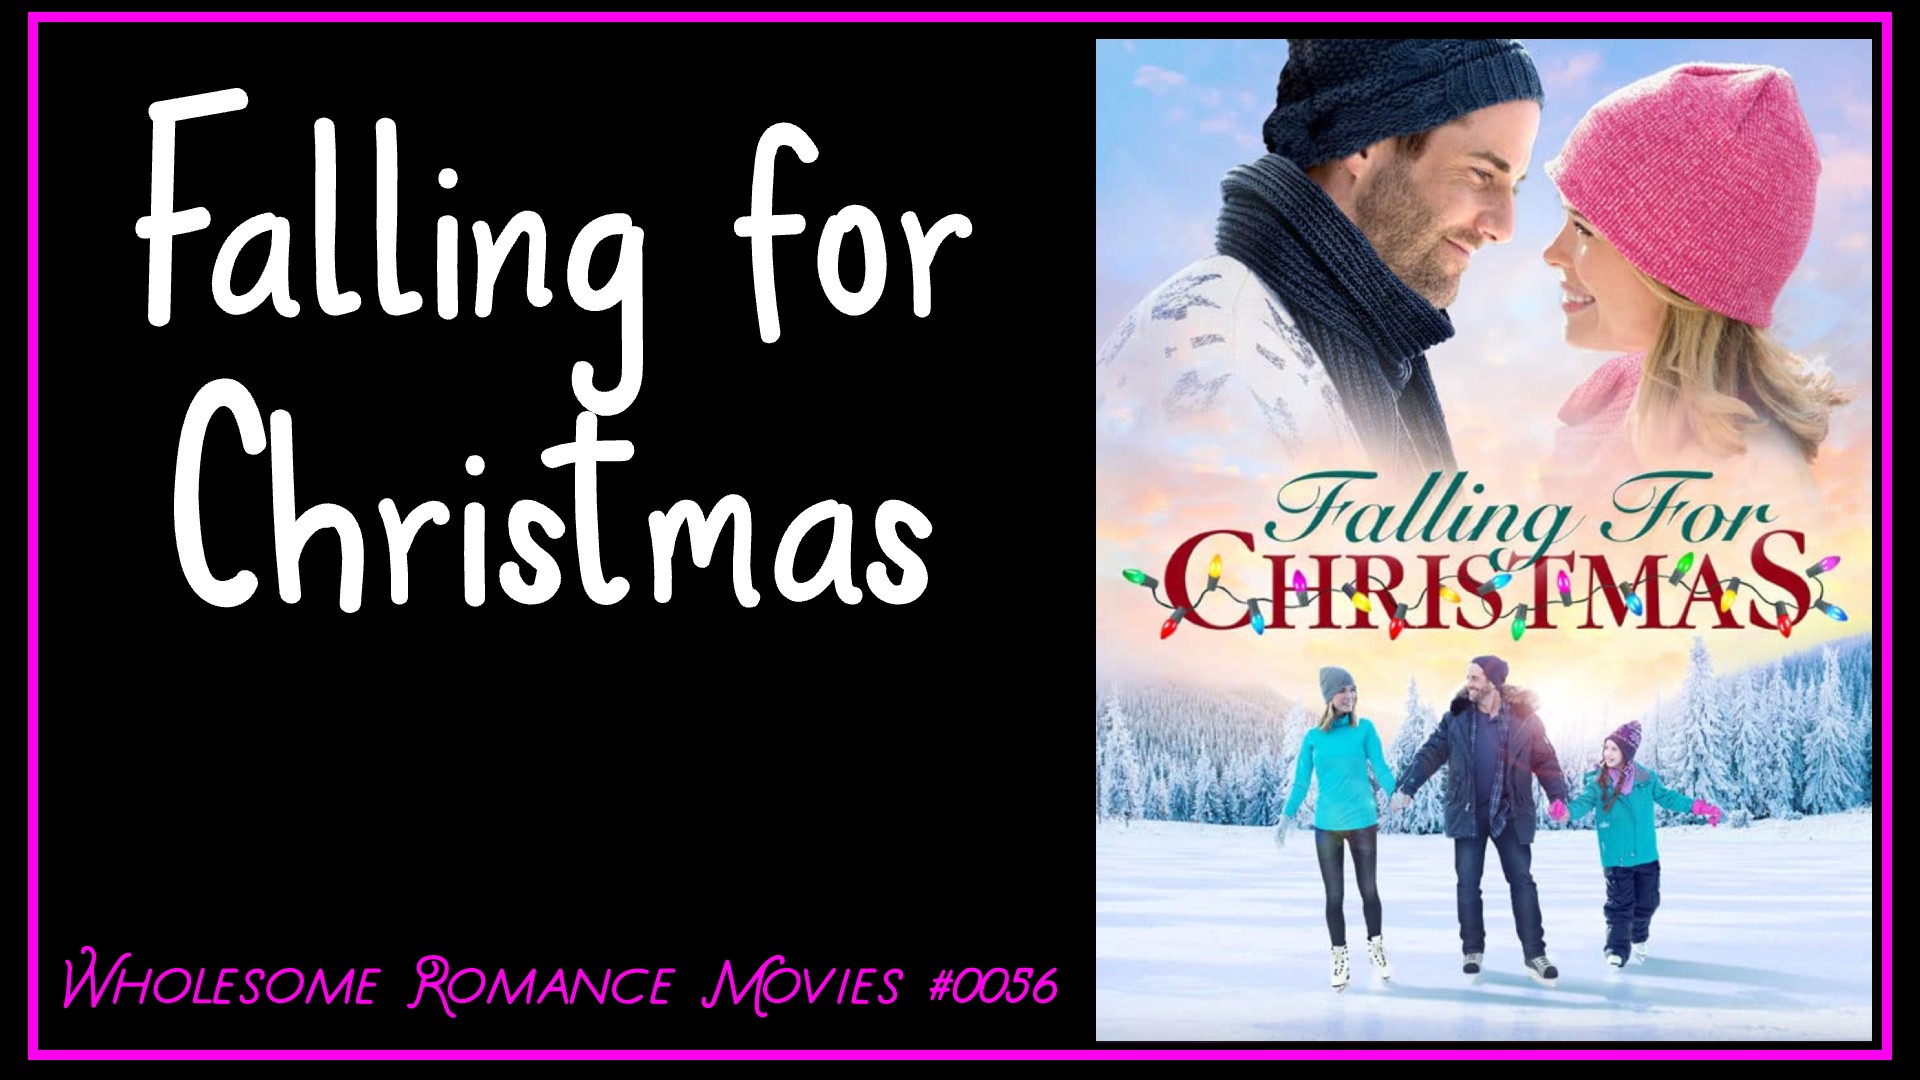 Falling for Christmas (2017) WRM Review